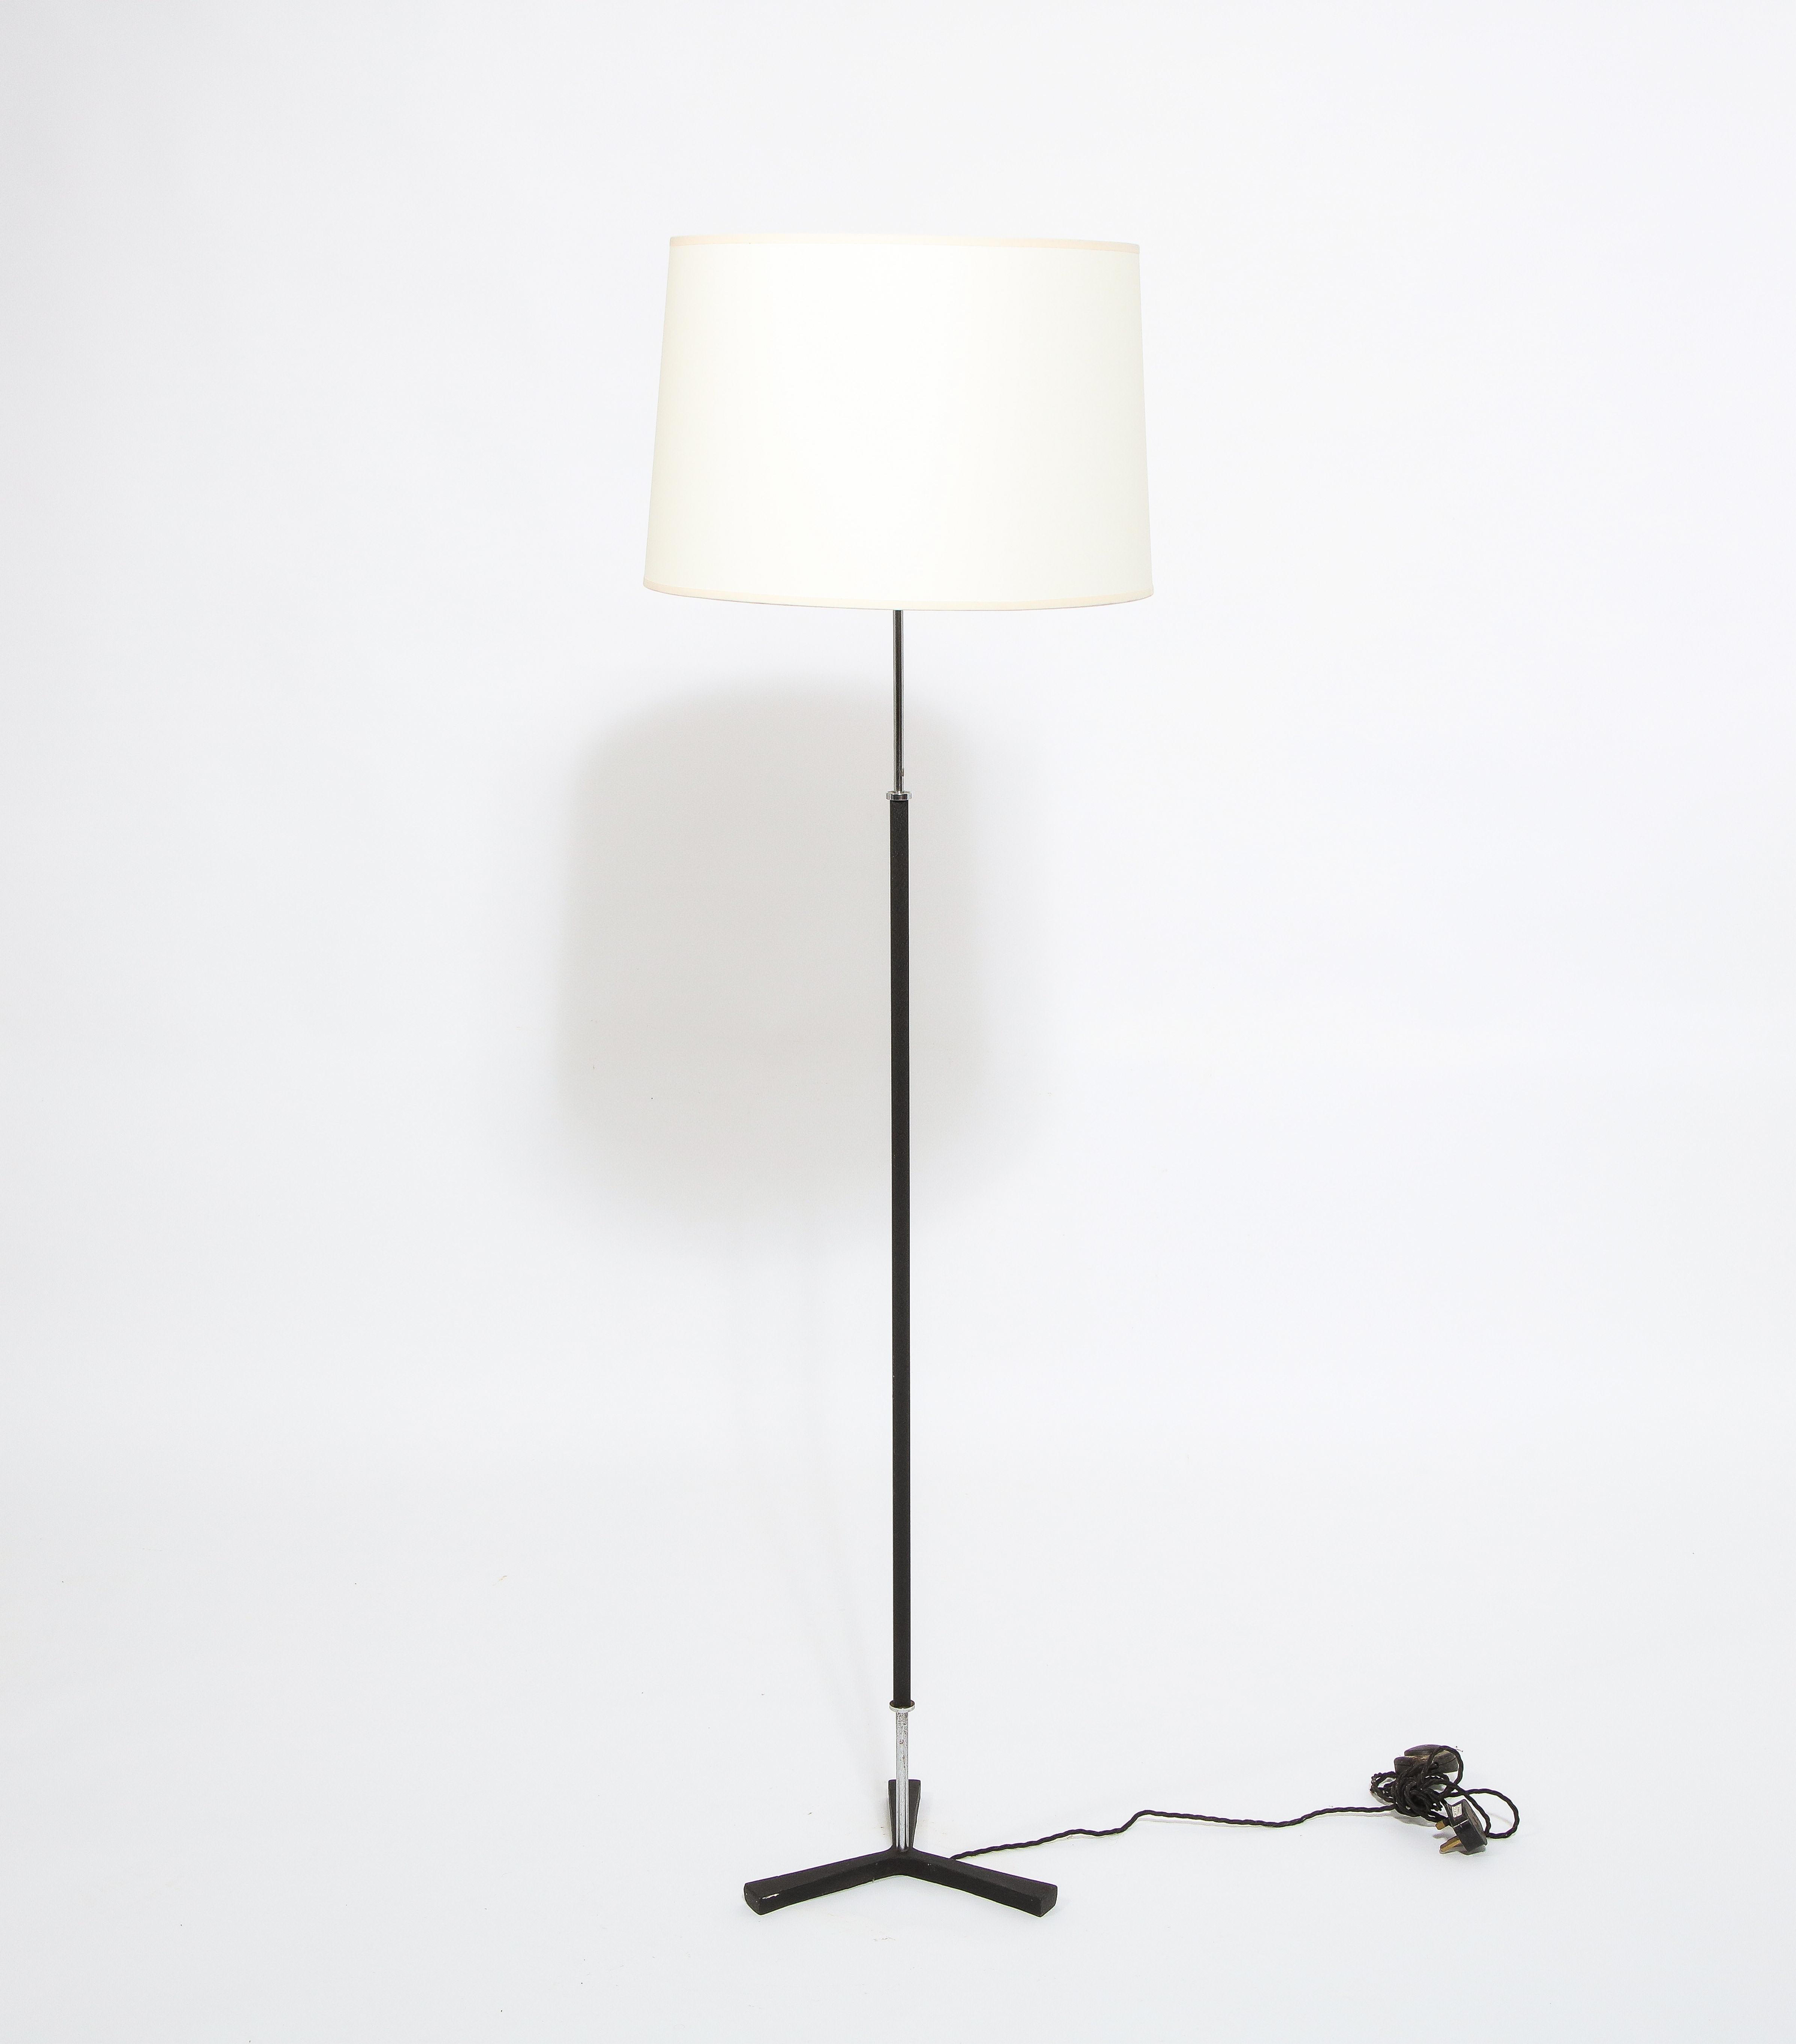 French Blackened Steel Tripod Floor Lamp, France 1960's For Sale